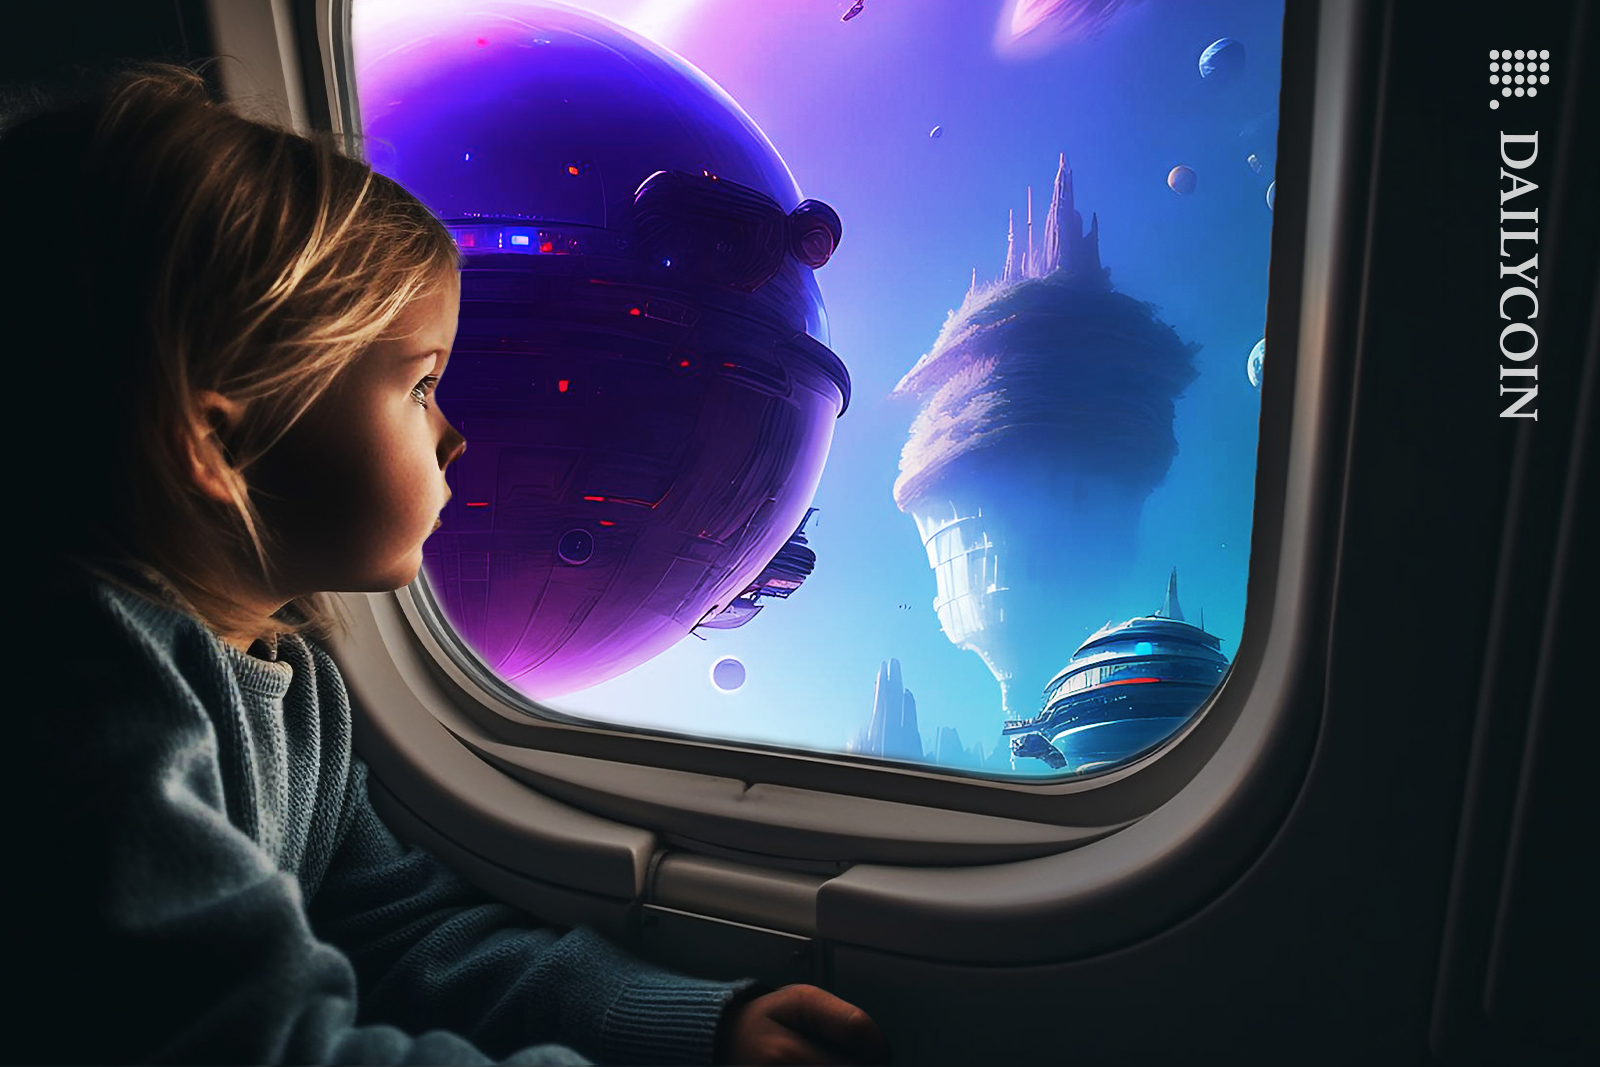 Little girl looking out the plane window seeing a futuristic land with spaceship balloons.